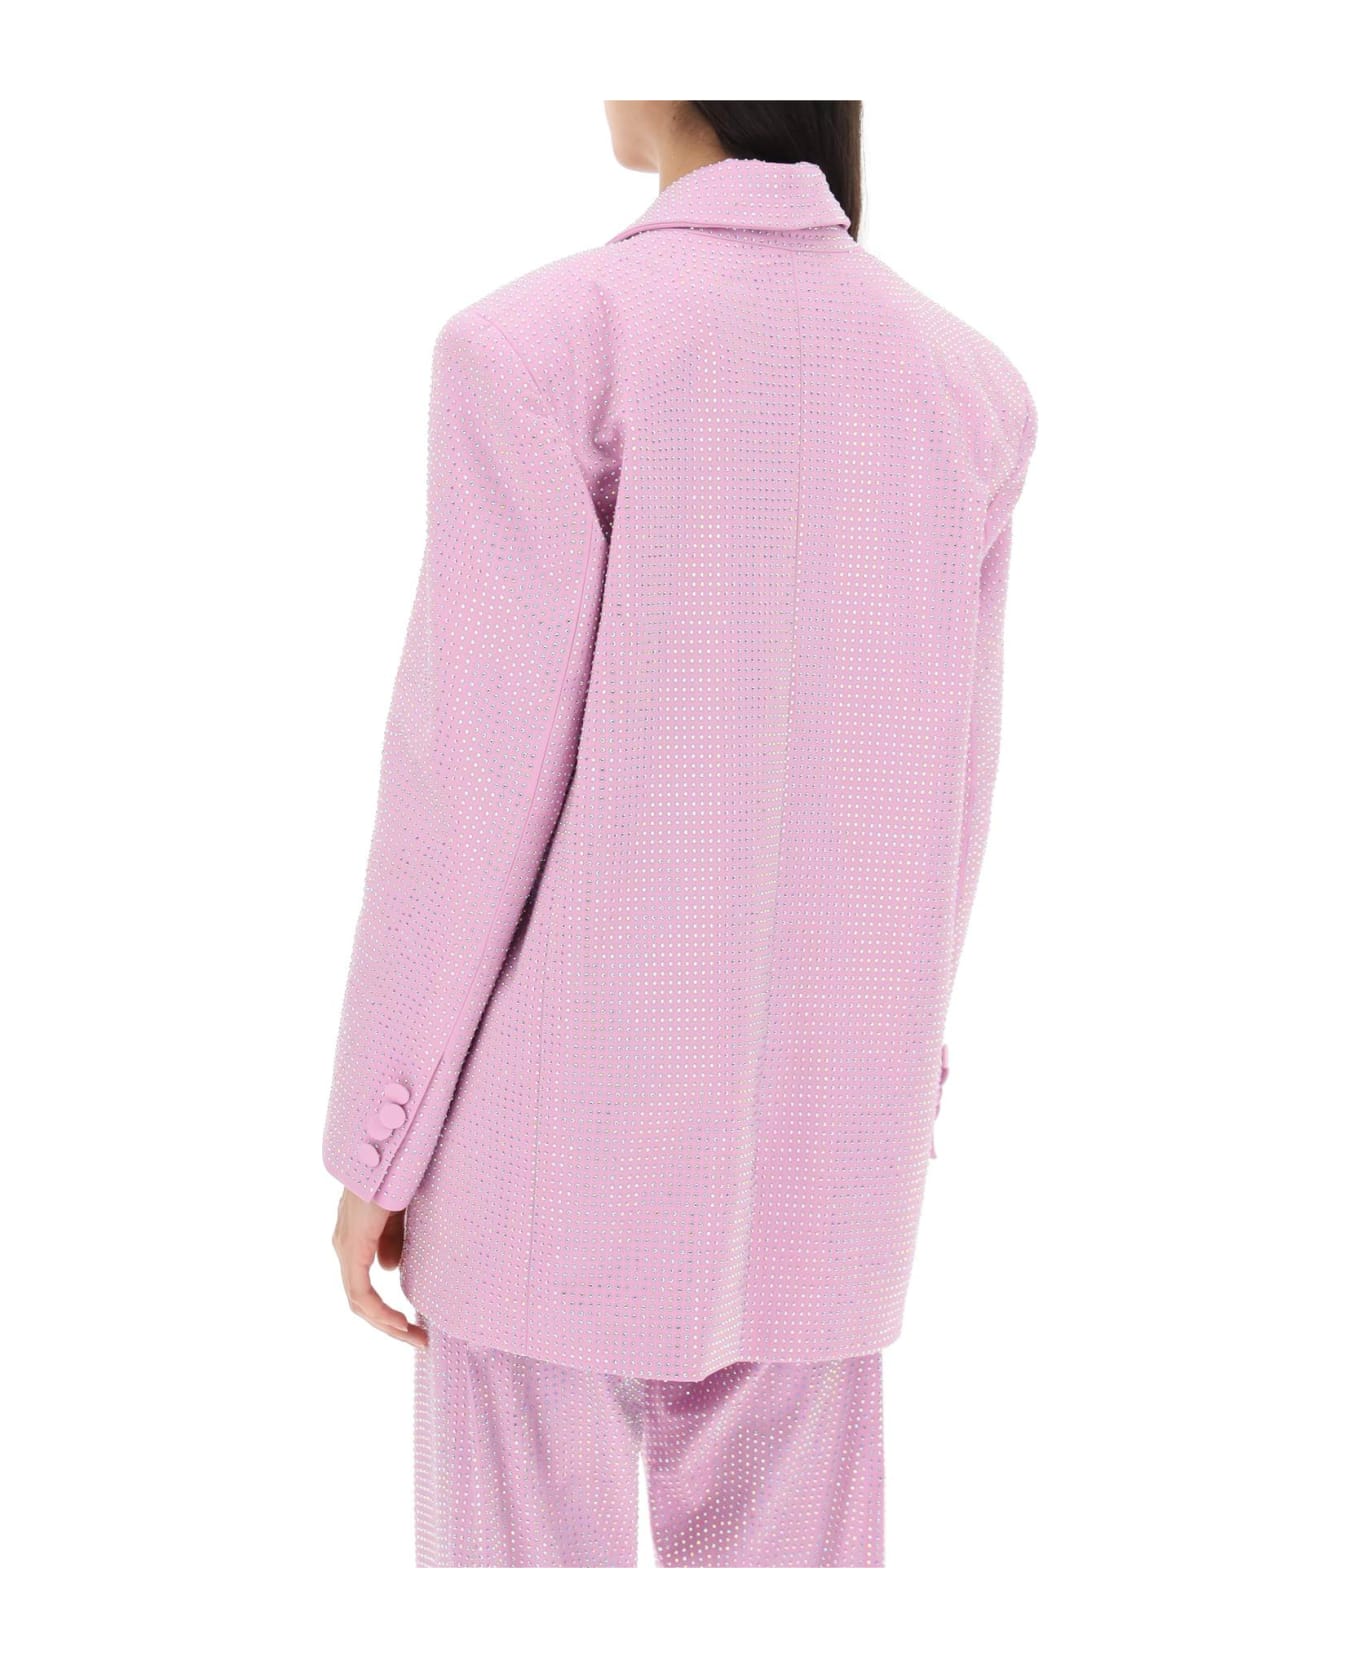 Giuseppe di Morabito Stretch Cotton Jacket With Crystals - LILAC PINK (Pink)